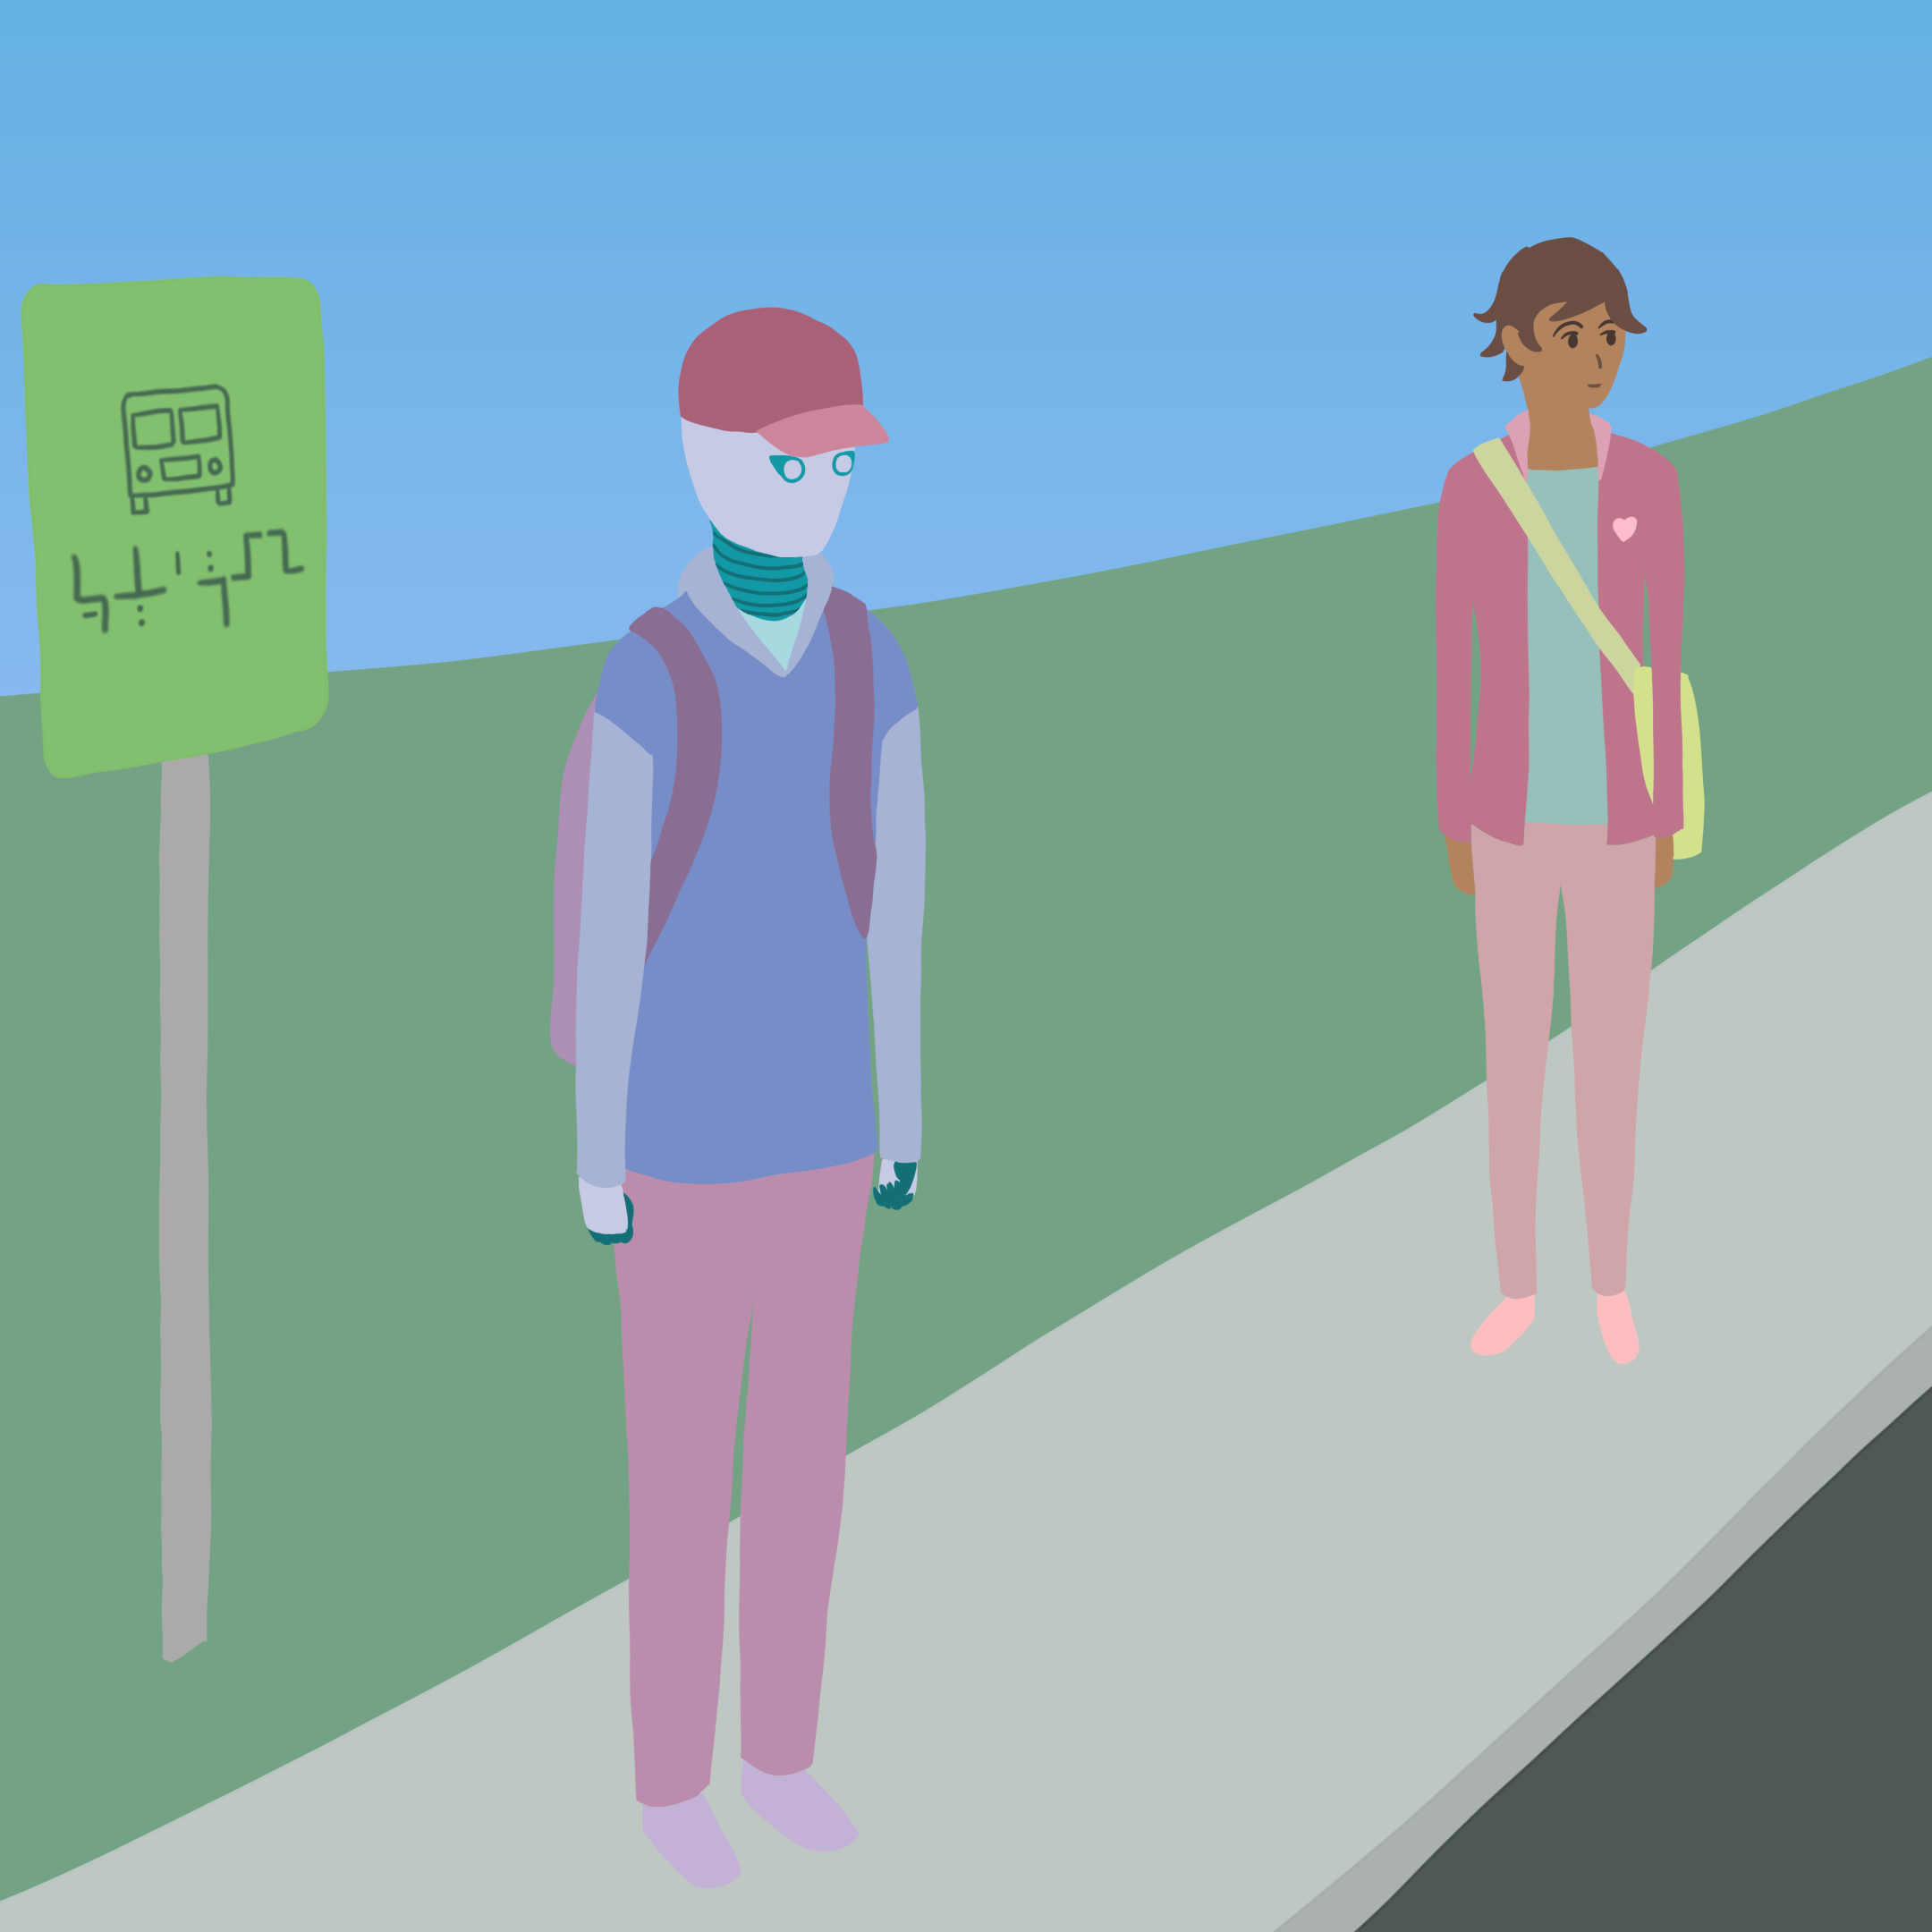 A robot named Rova standing at the bus stop with a human named Evi standing nearby.